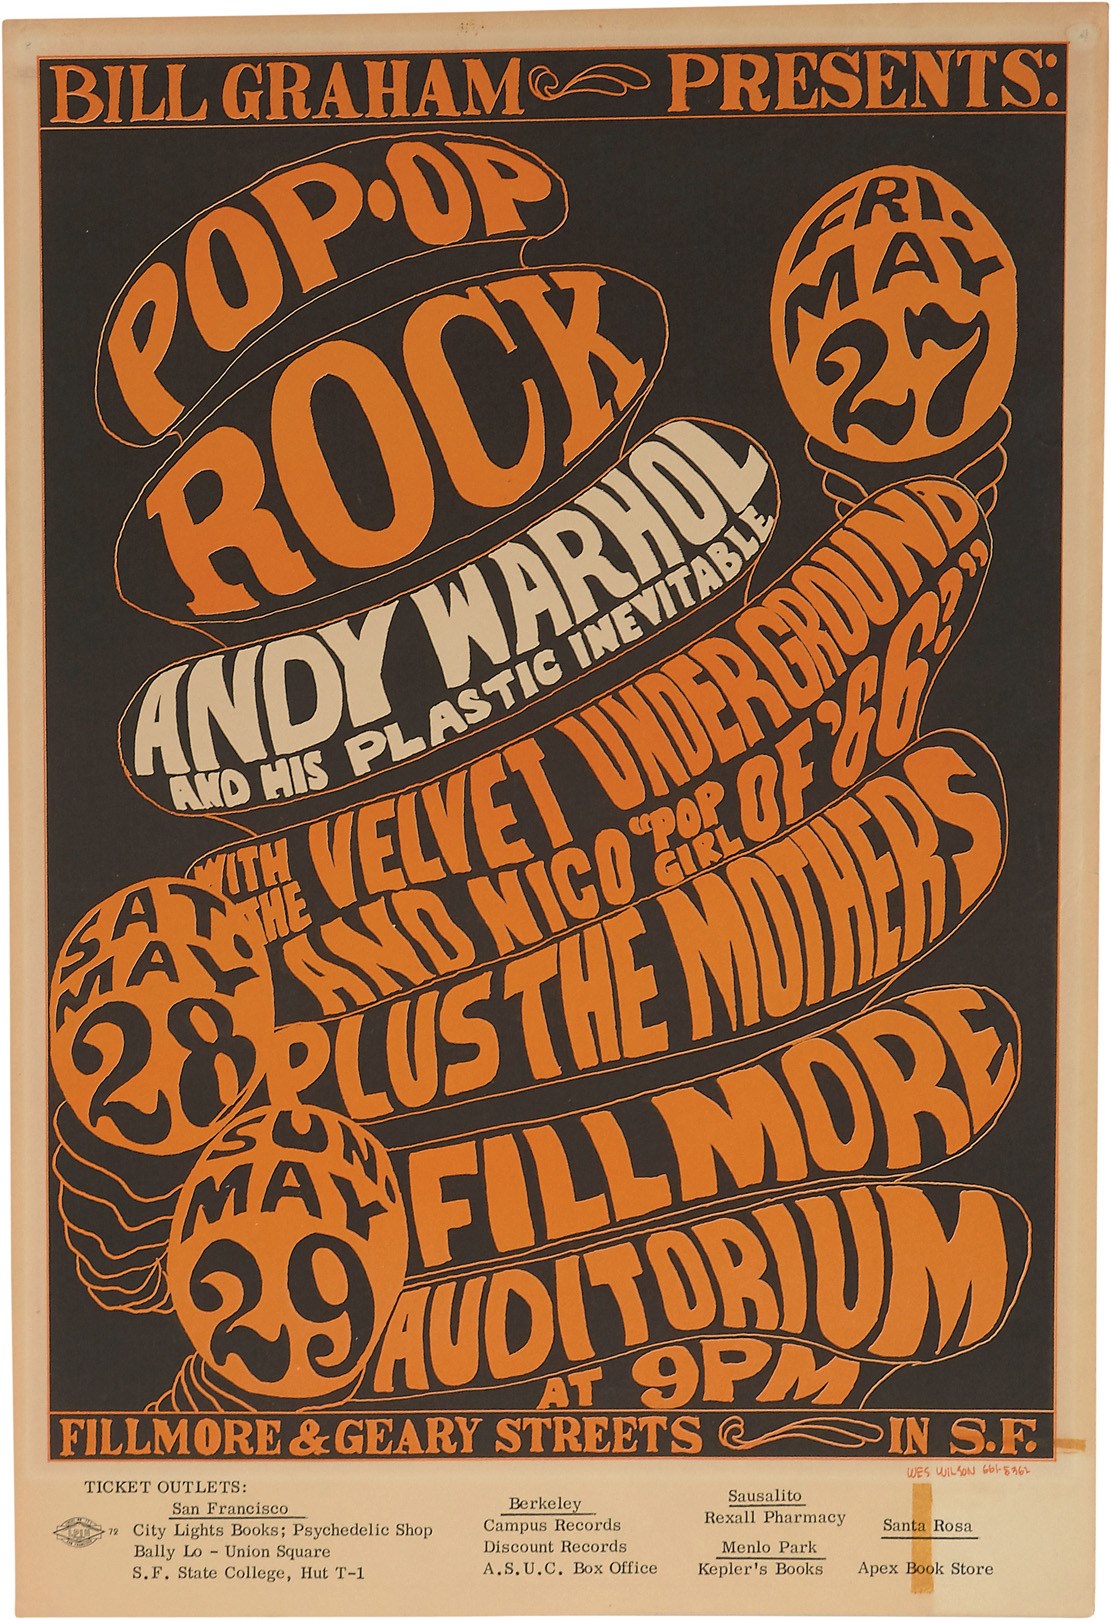 Rock 'N' Roll - 1966 Andy Warhol and The Velvet Underground Fillmore Poster (First Printing)